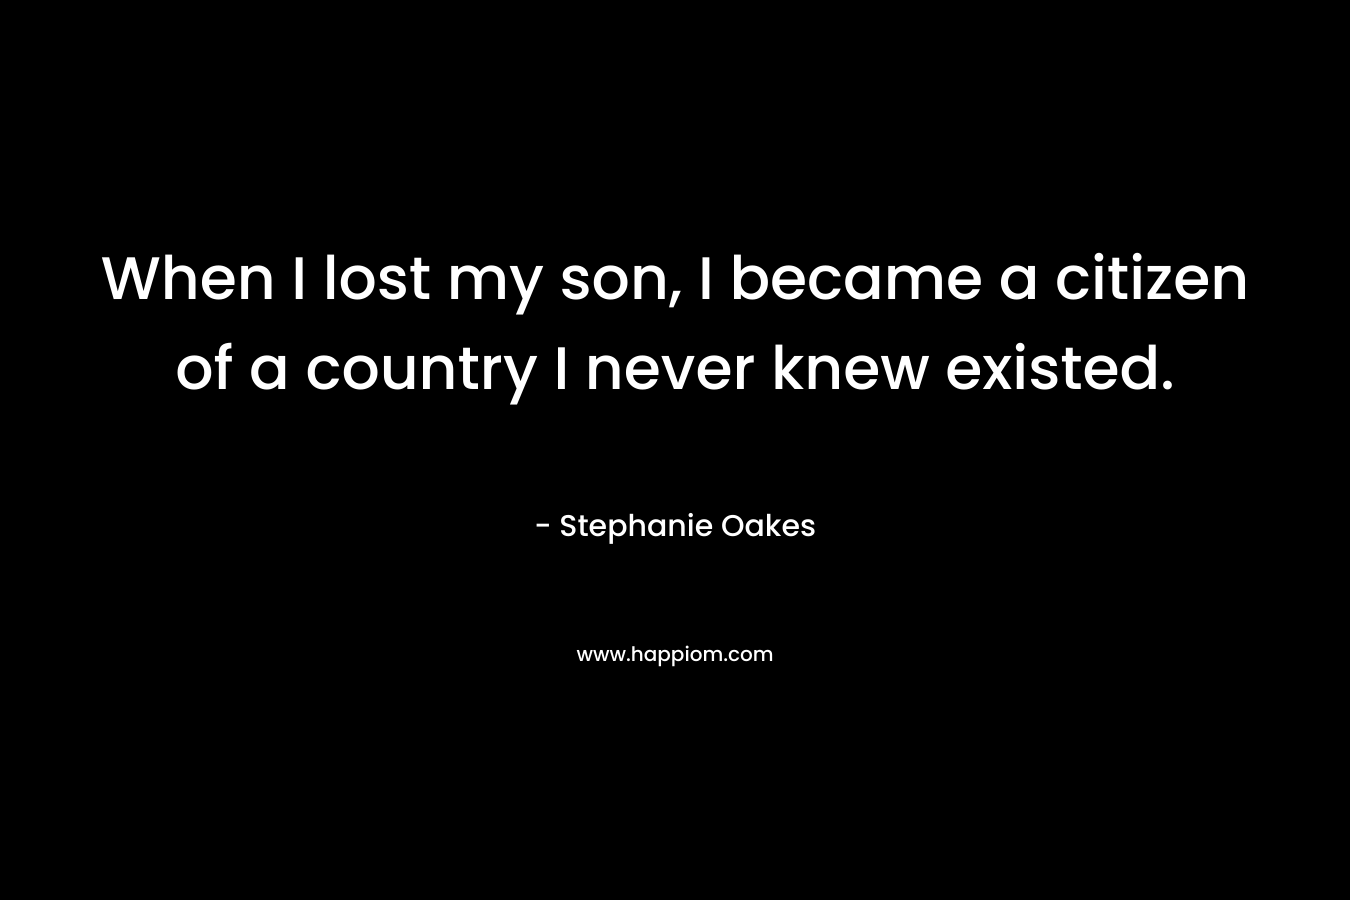 When I lost my son, I became a citizen of a country I never knew existed.